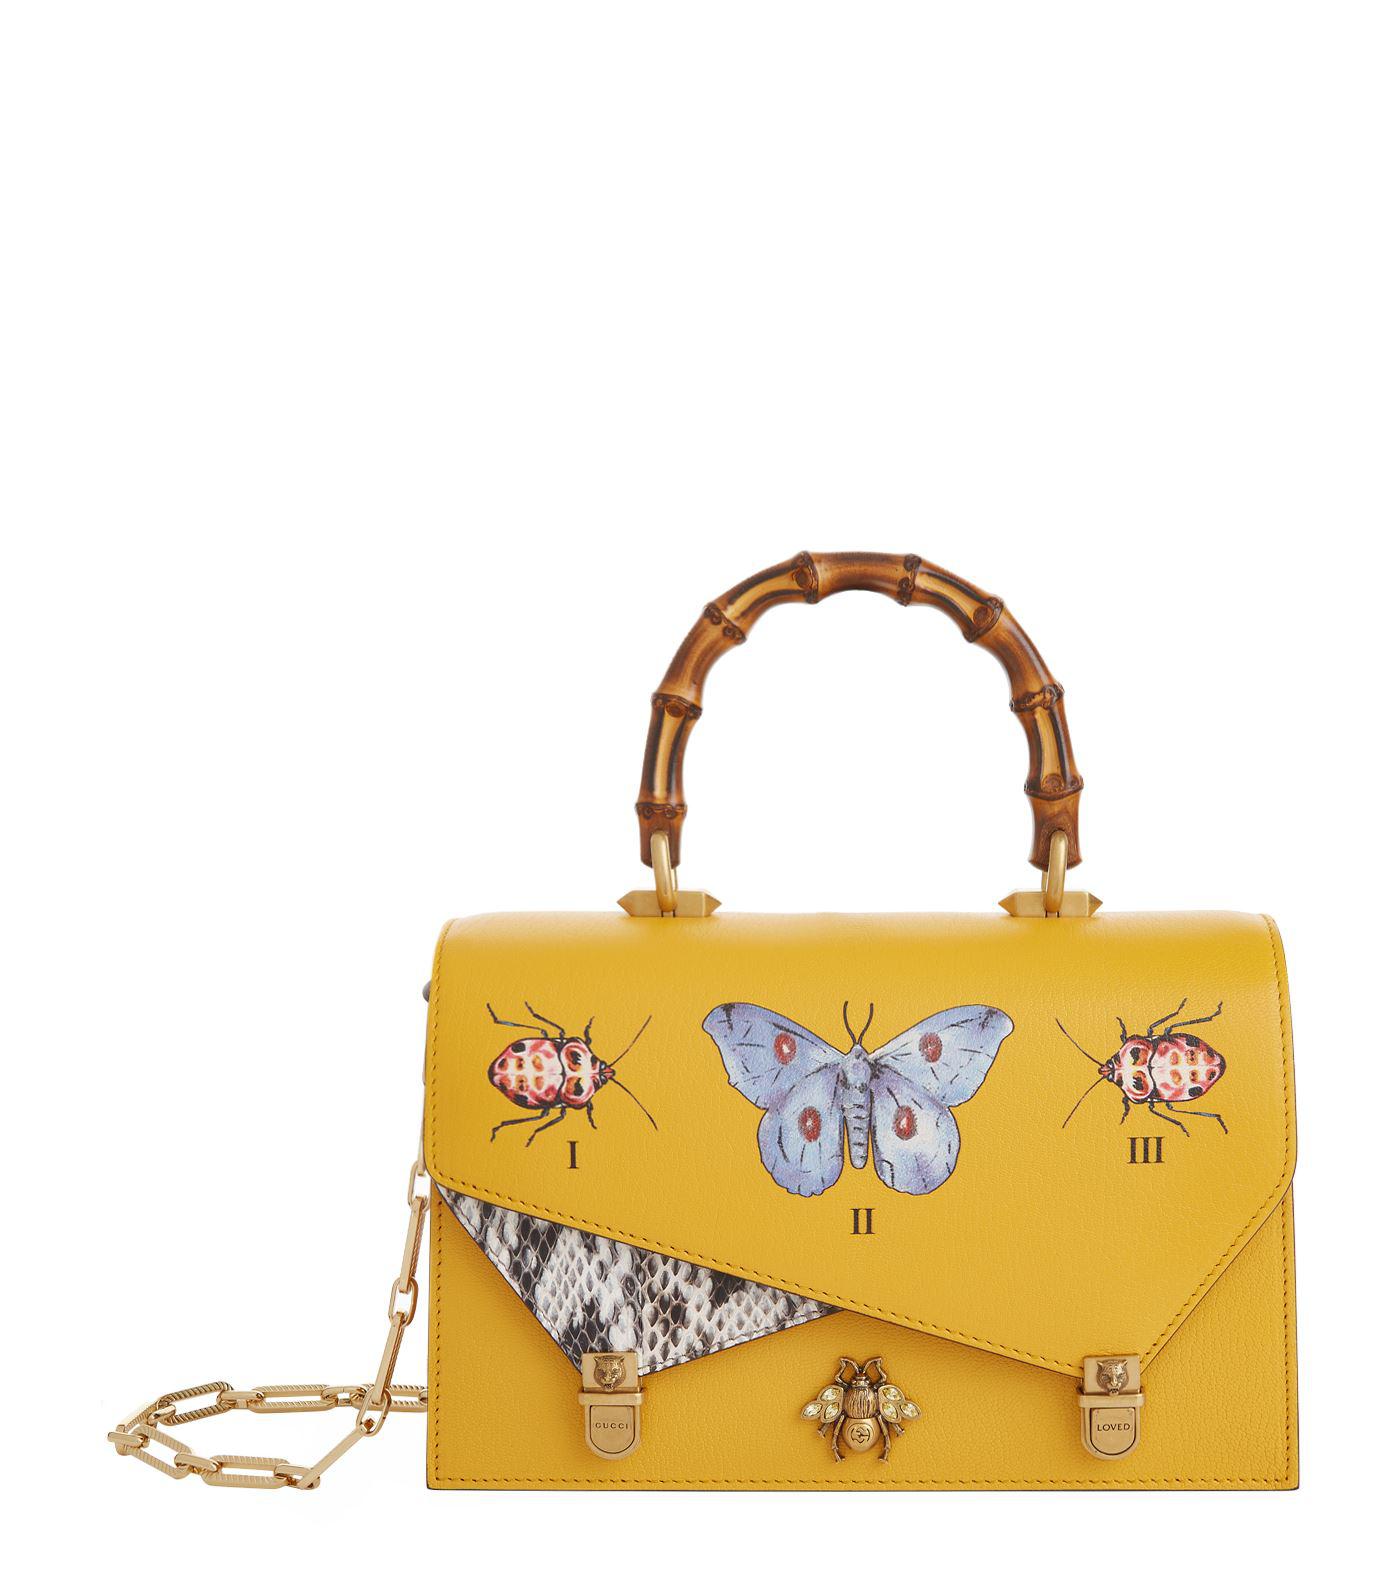 Gucci Ottilia Butterfly Top Handle Bag in Yellow - Lyst